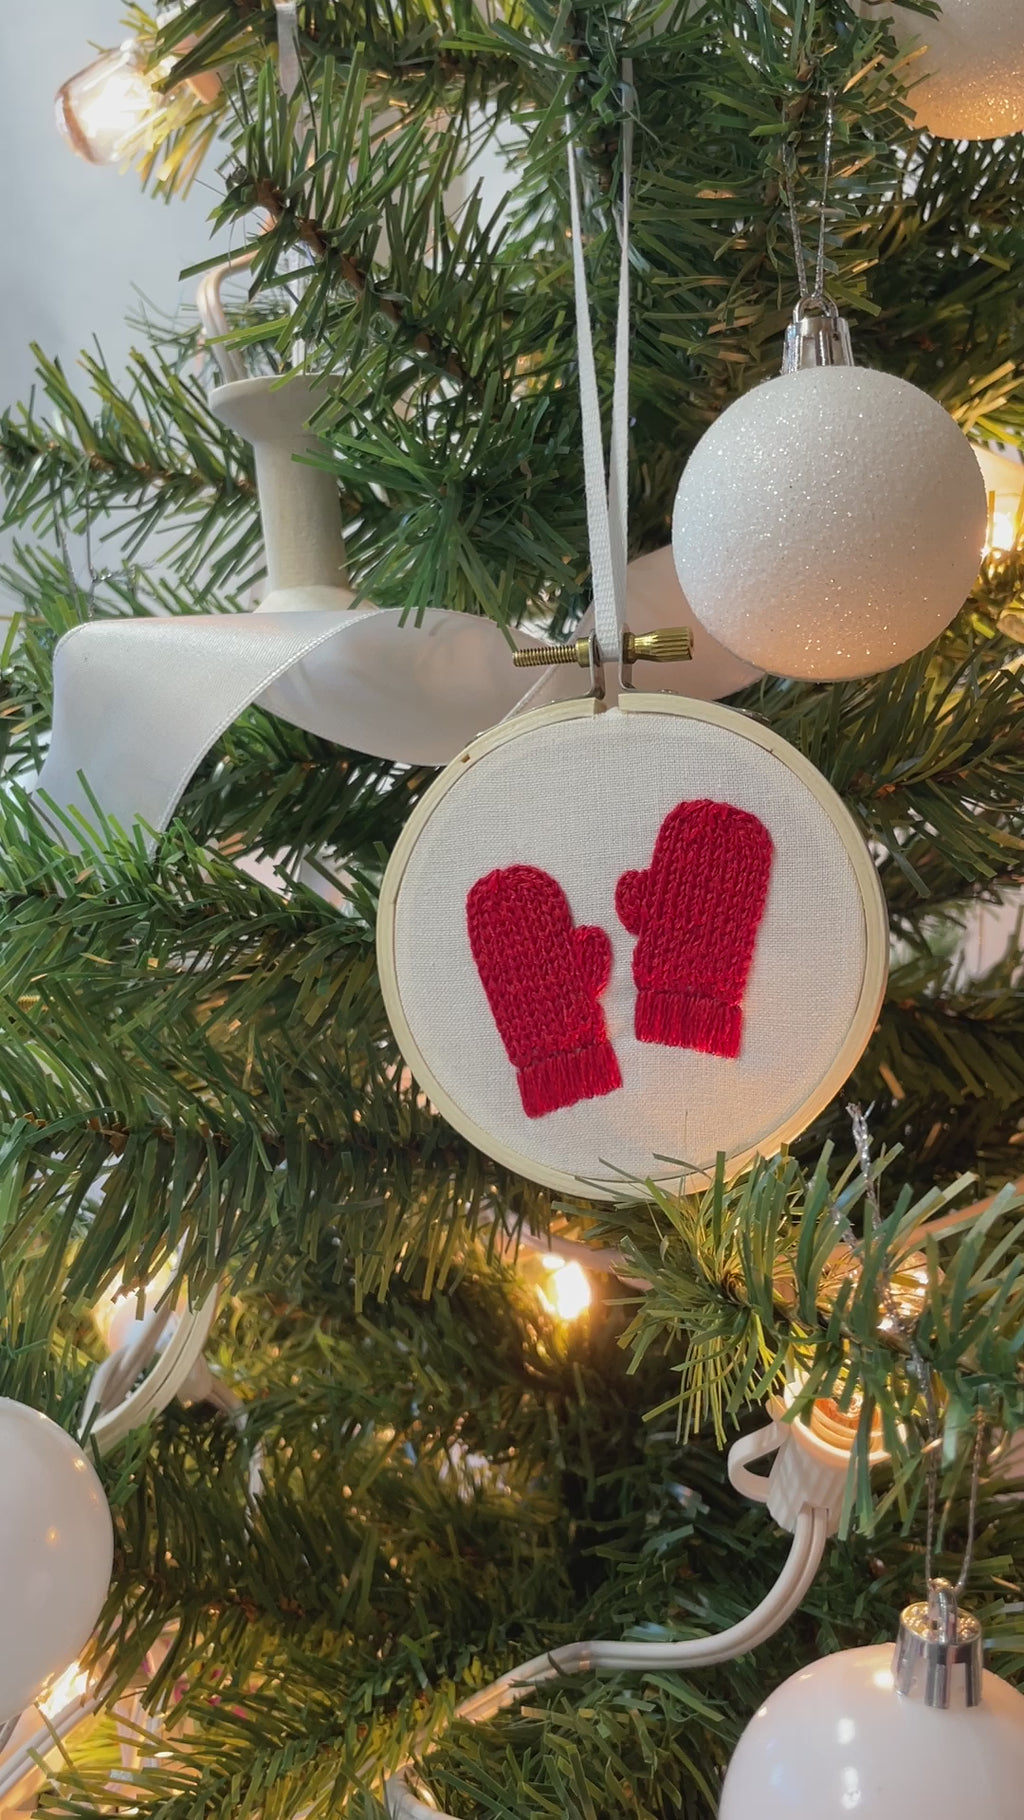 Cable Knit Mittens Embroidered Tree Ornament by kdornbier